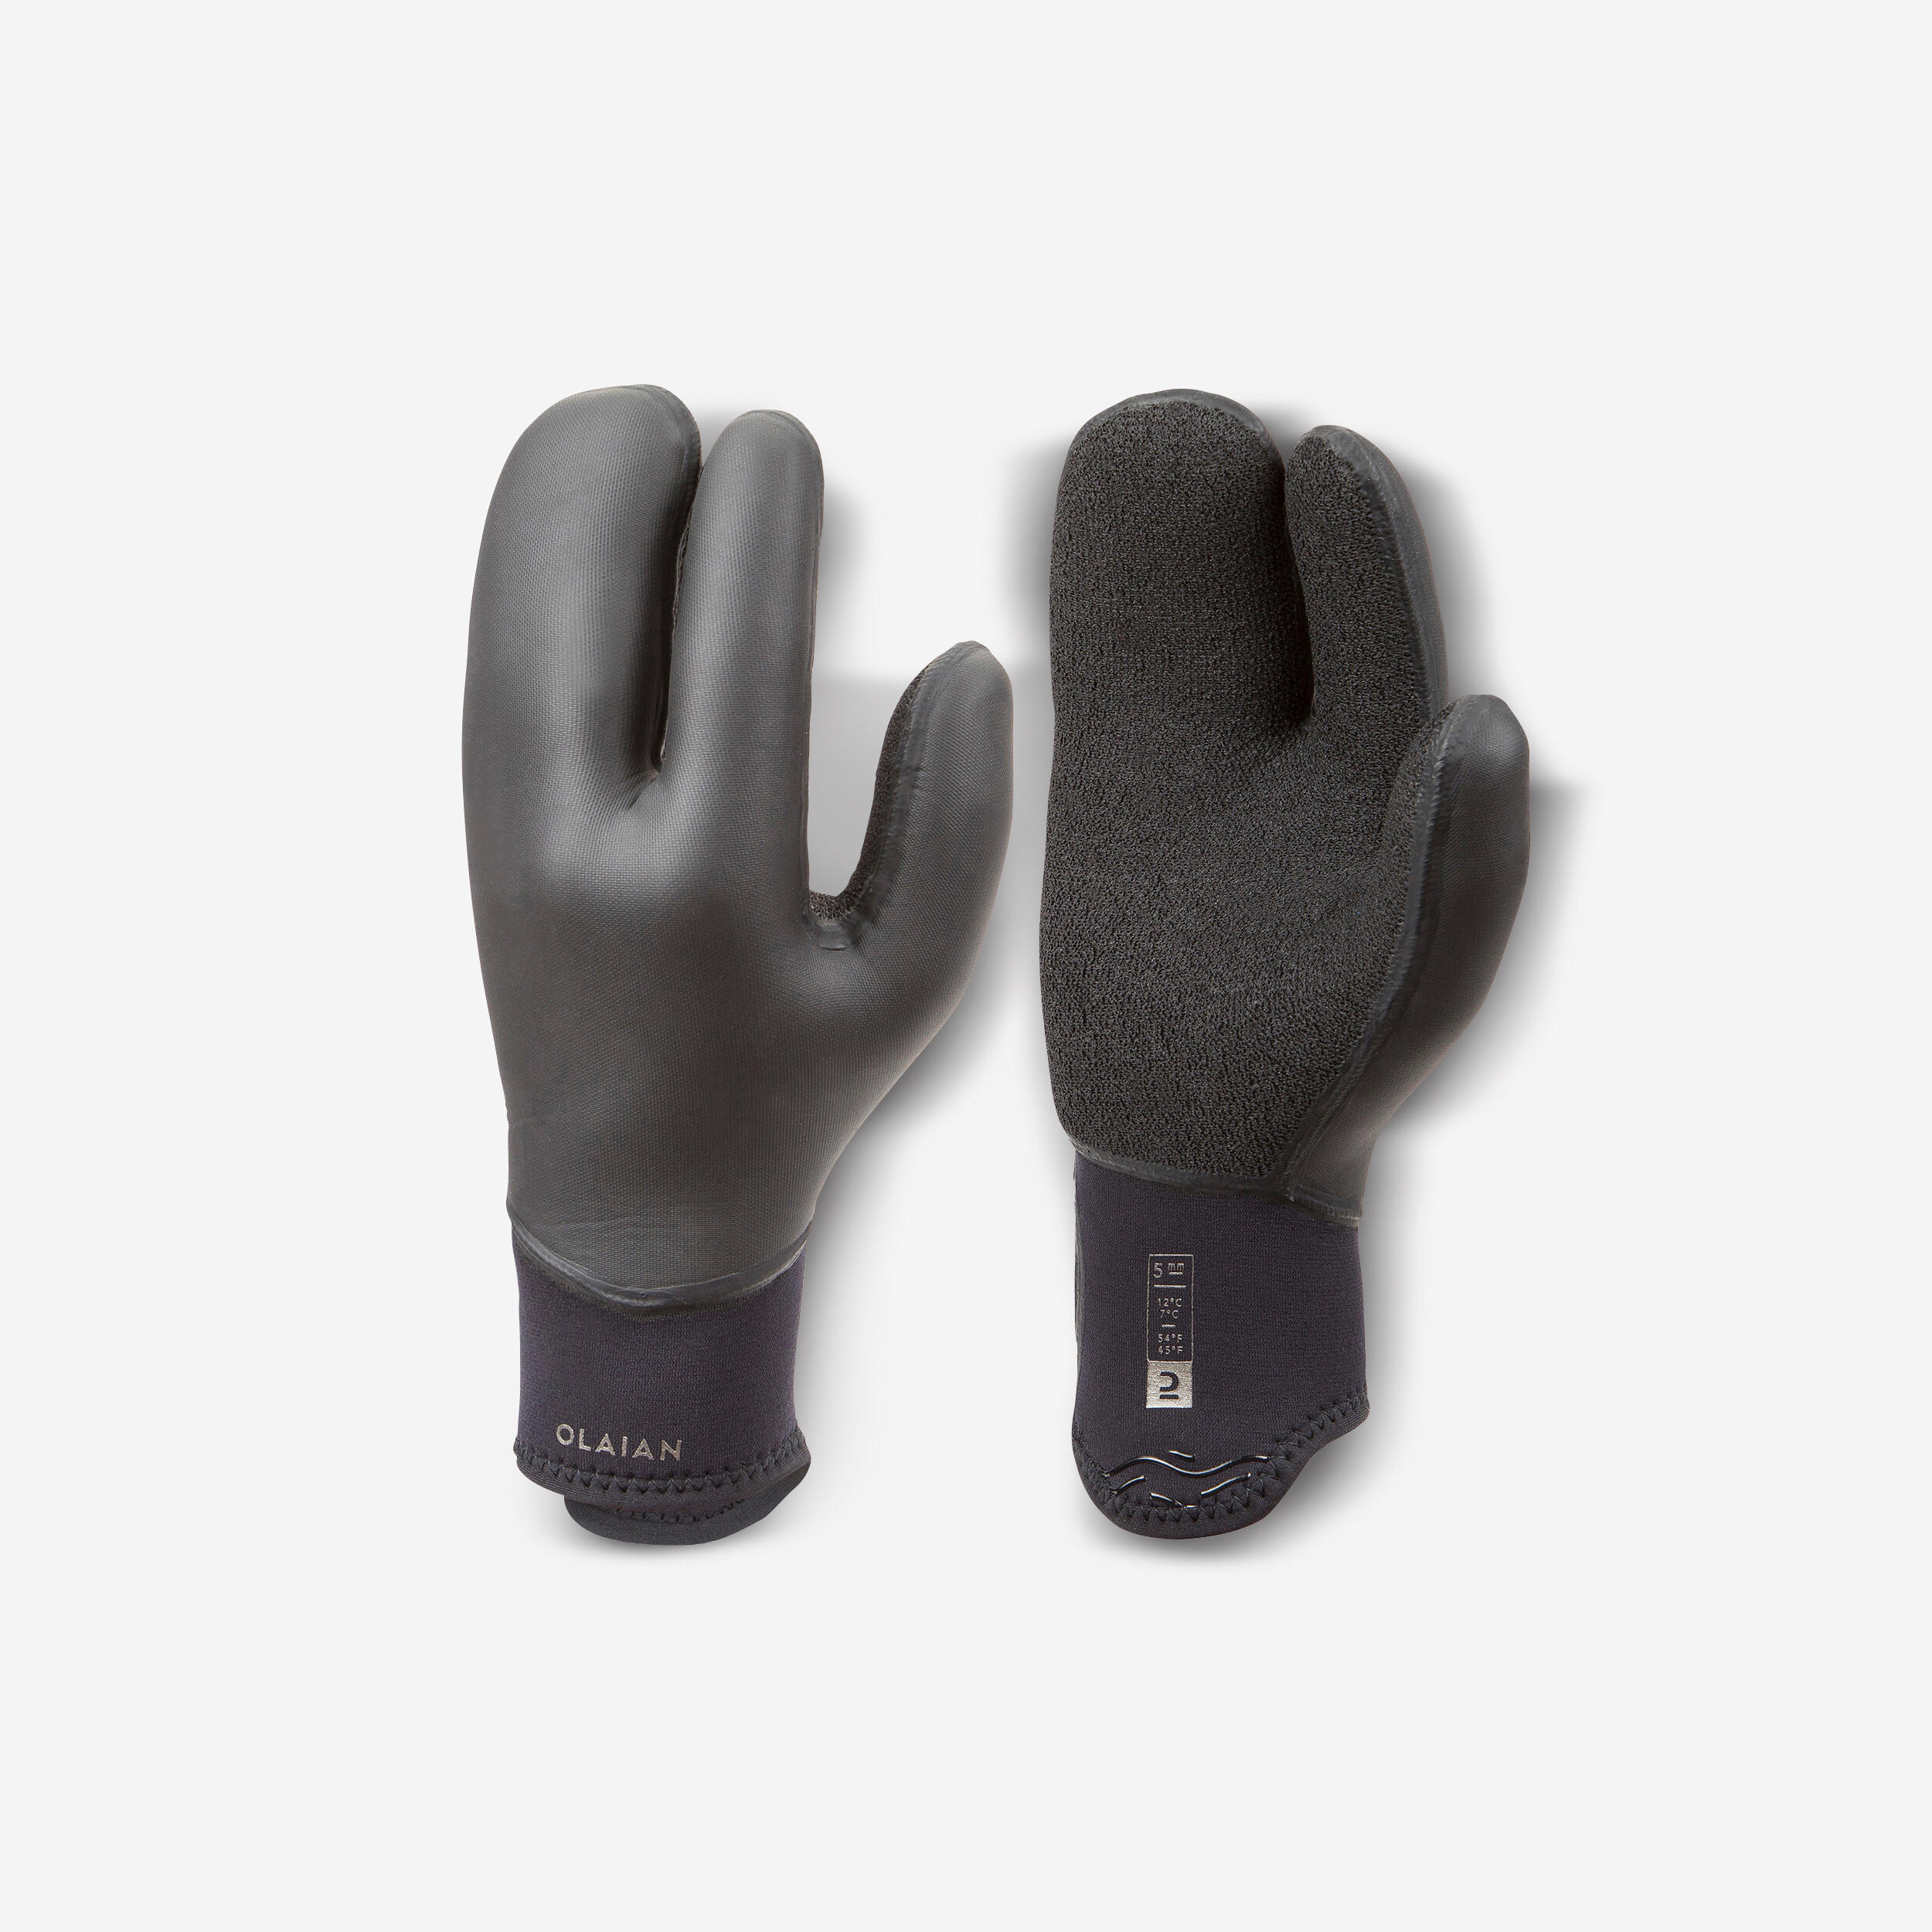 OLAIAN Neoprene Surf Gloves for Very cold water 5 mm